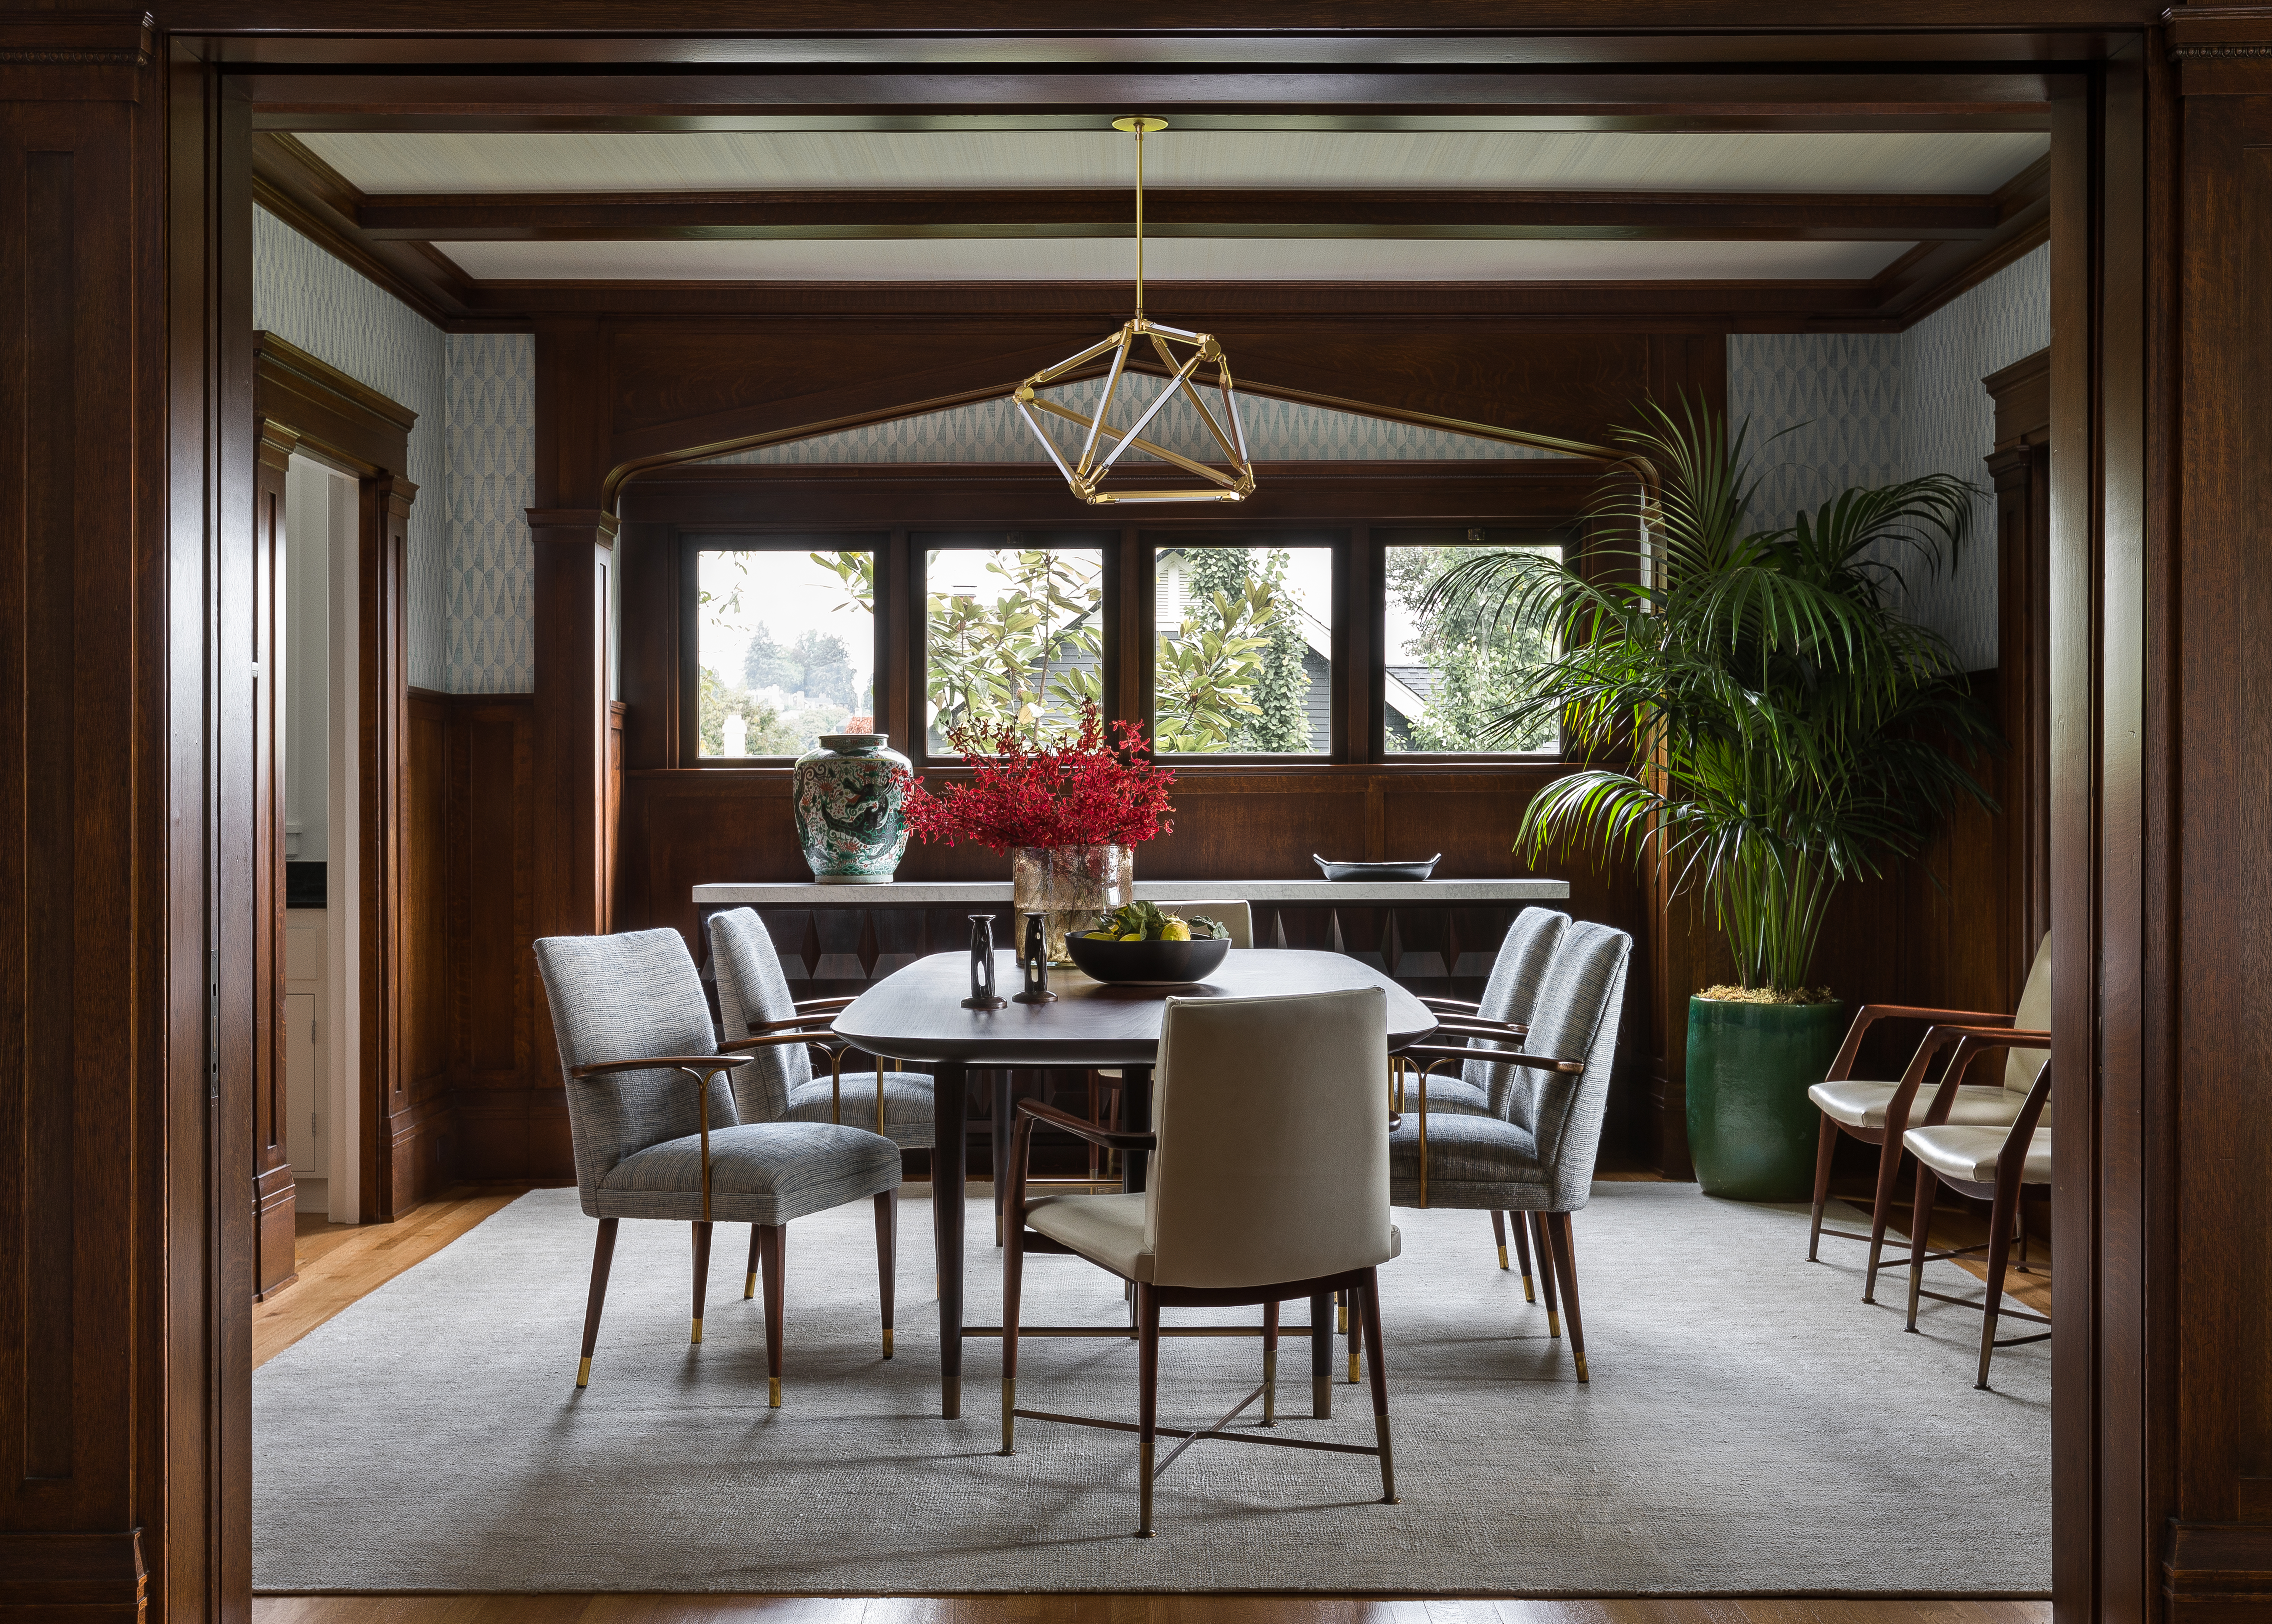 The dining room features patterned rice cloth walls and a custom walnut and brass dining table. Italian and Spanish midcentury chairs were reupholstered in leather and linen.